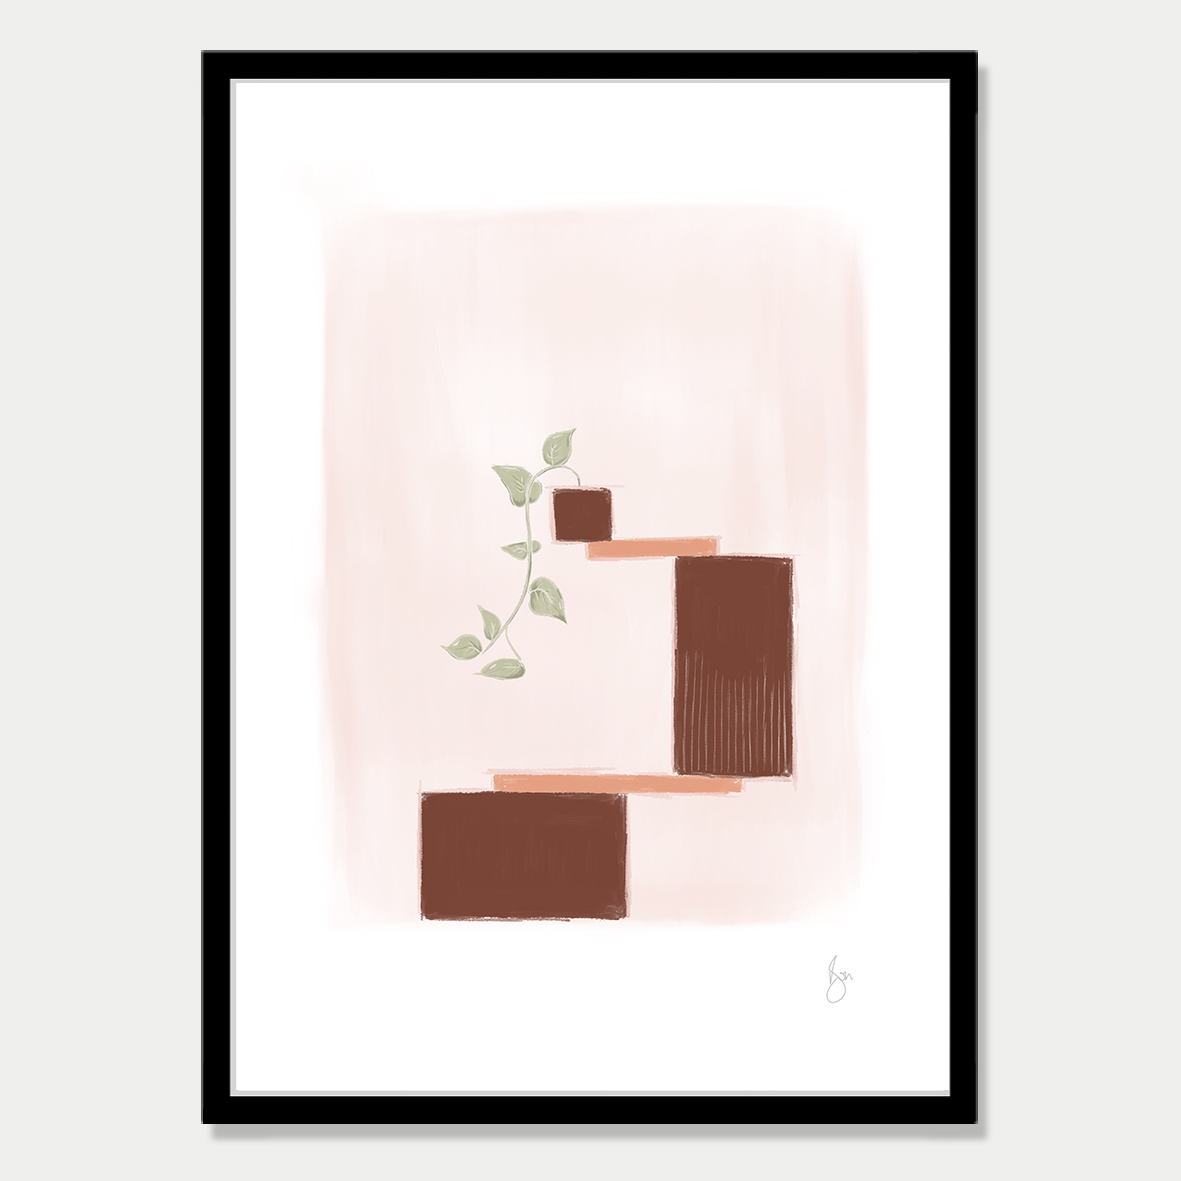 Art print of several blocks balancing with a single vine growing from the top block, in a soft autumn colour palette by Bon Jung. Printed in New Zealand by endemicworld and framed in black.